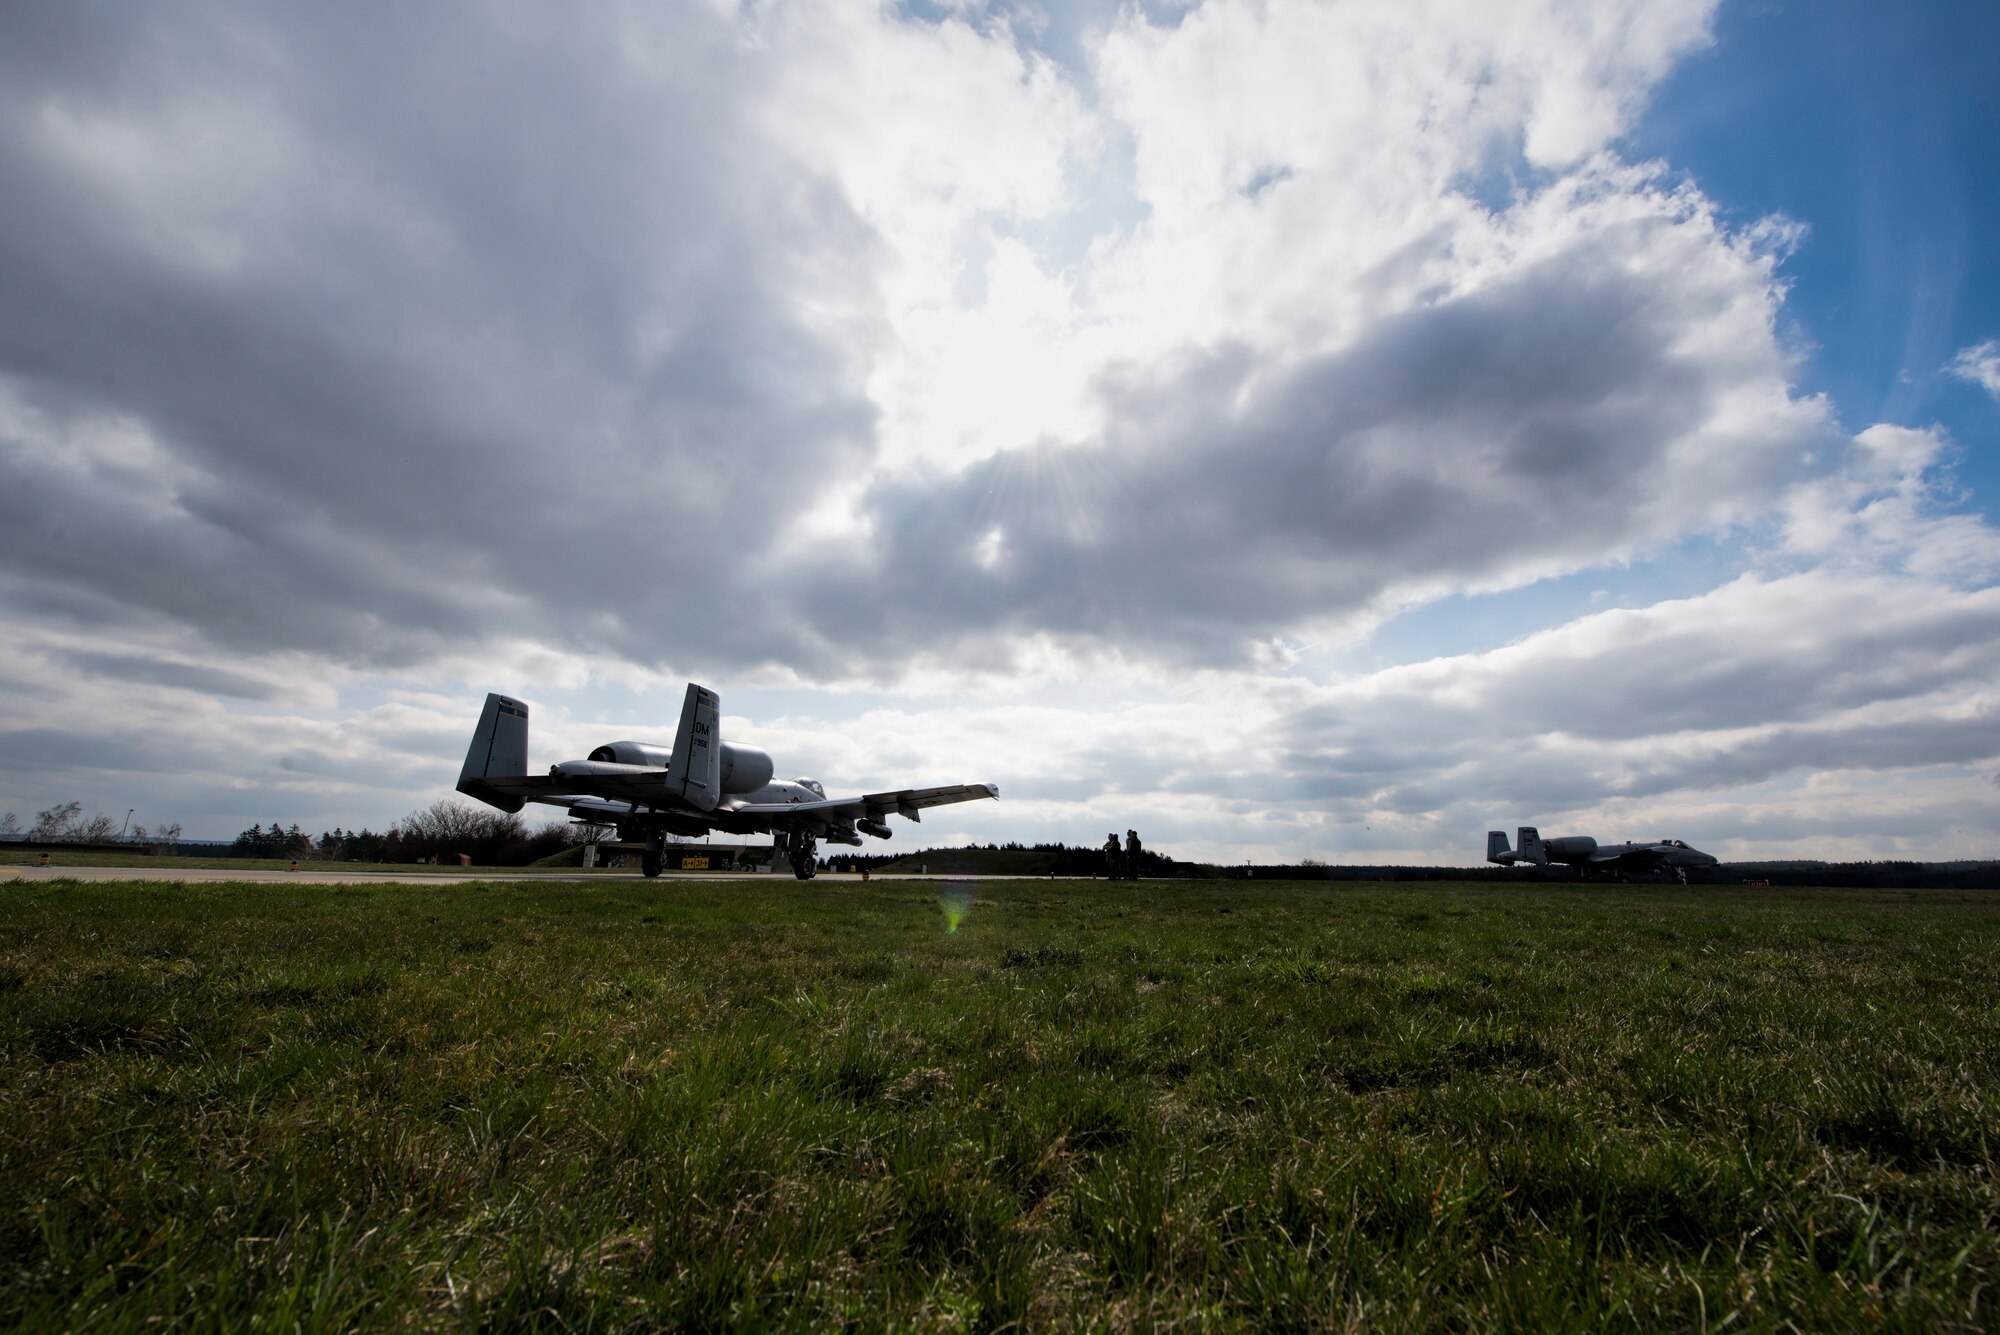 A U.S. Air Force A-10 Thunderbolt II attack aircraft pilot assigned to the 354th Expeditionary Fighter Squadron taxis to the runway during a theater security package deployment to Namest Air Base, Czech Republic, April 9, 2015. The pilots will conduct training alongside NATO allies to strengthen interoperability and demonstrate U.S. commitment to the security and stability of Europe. (U.S. Air Force photo by Staff Sgt. Christopher Ruano/Released)